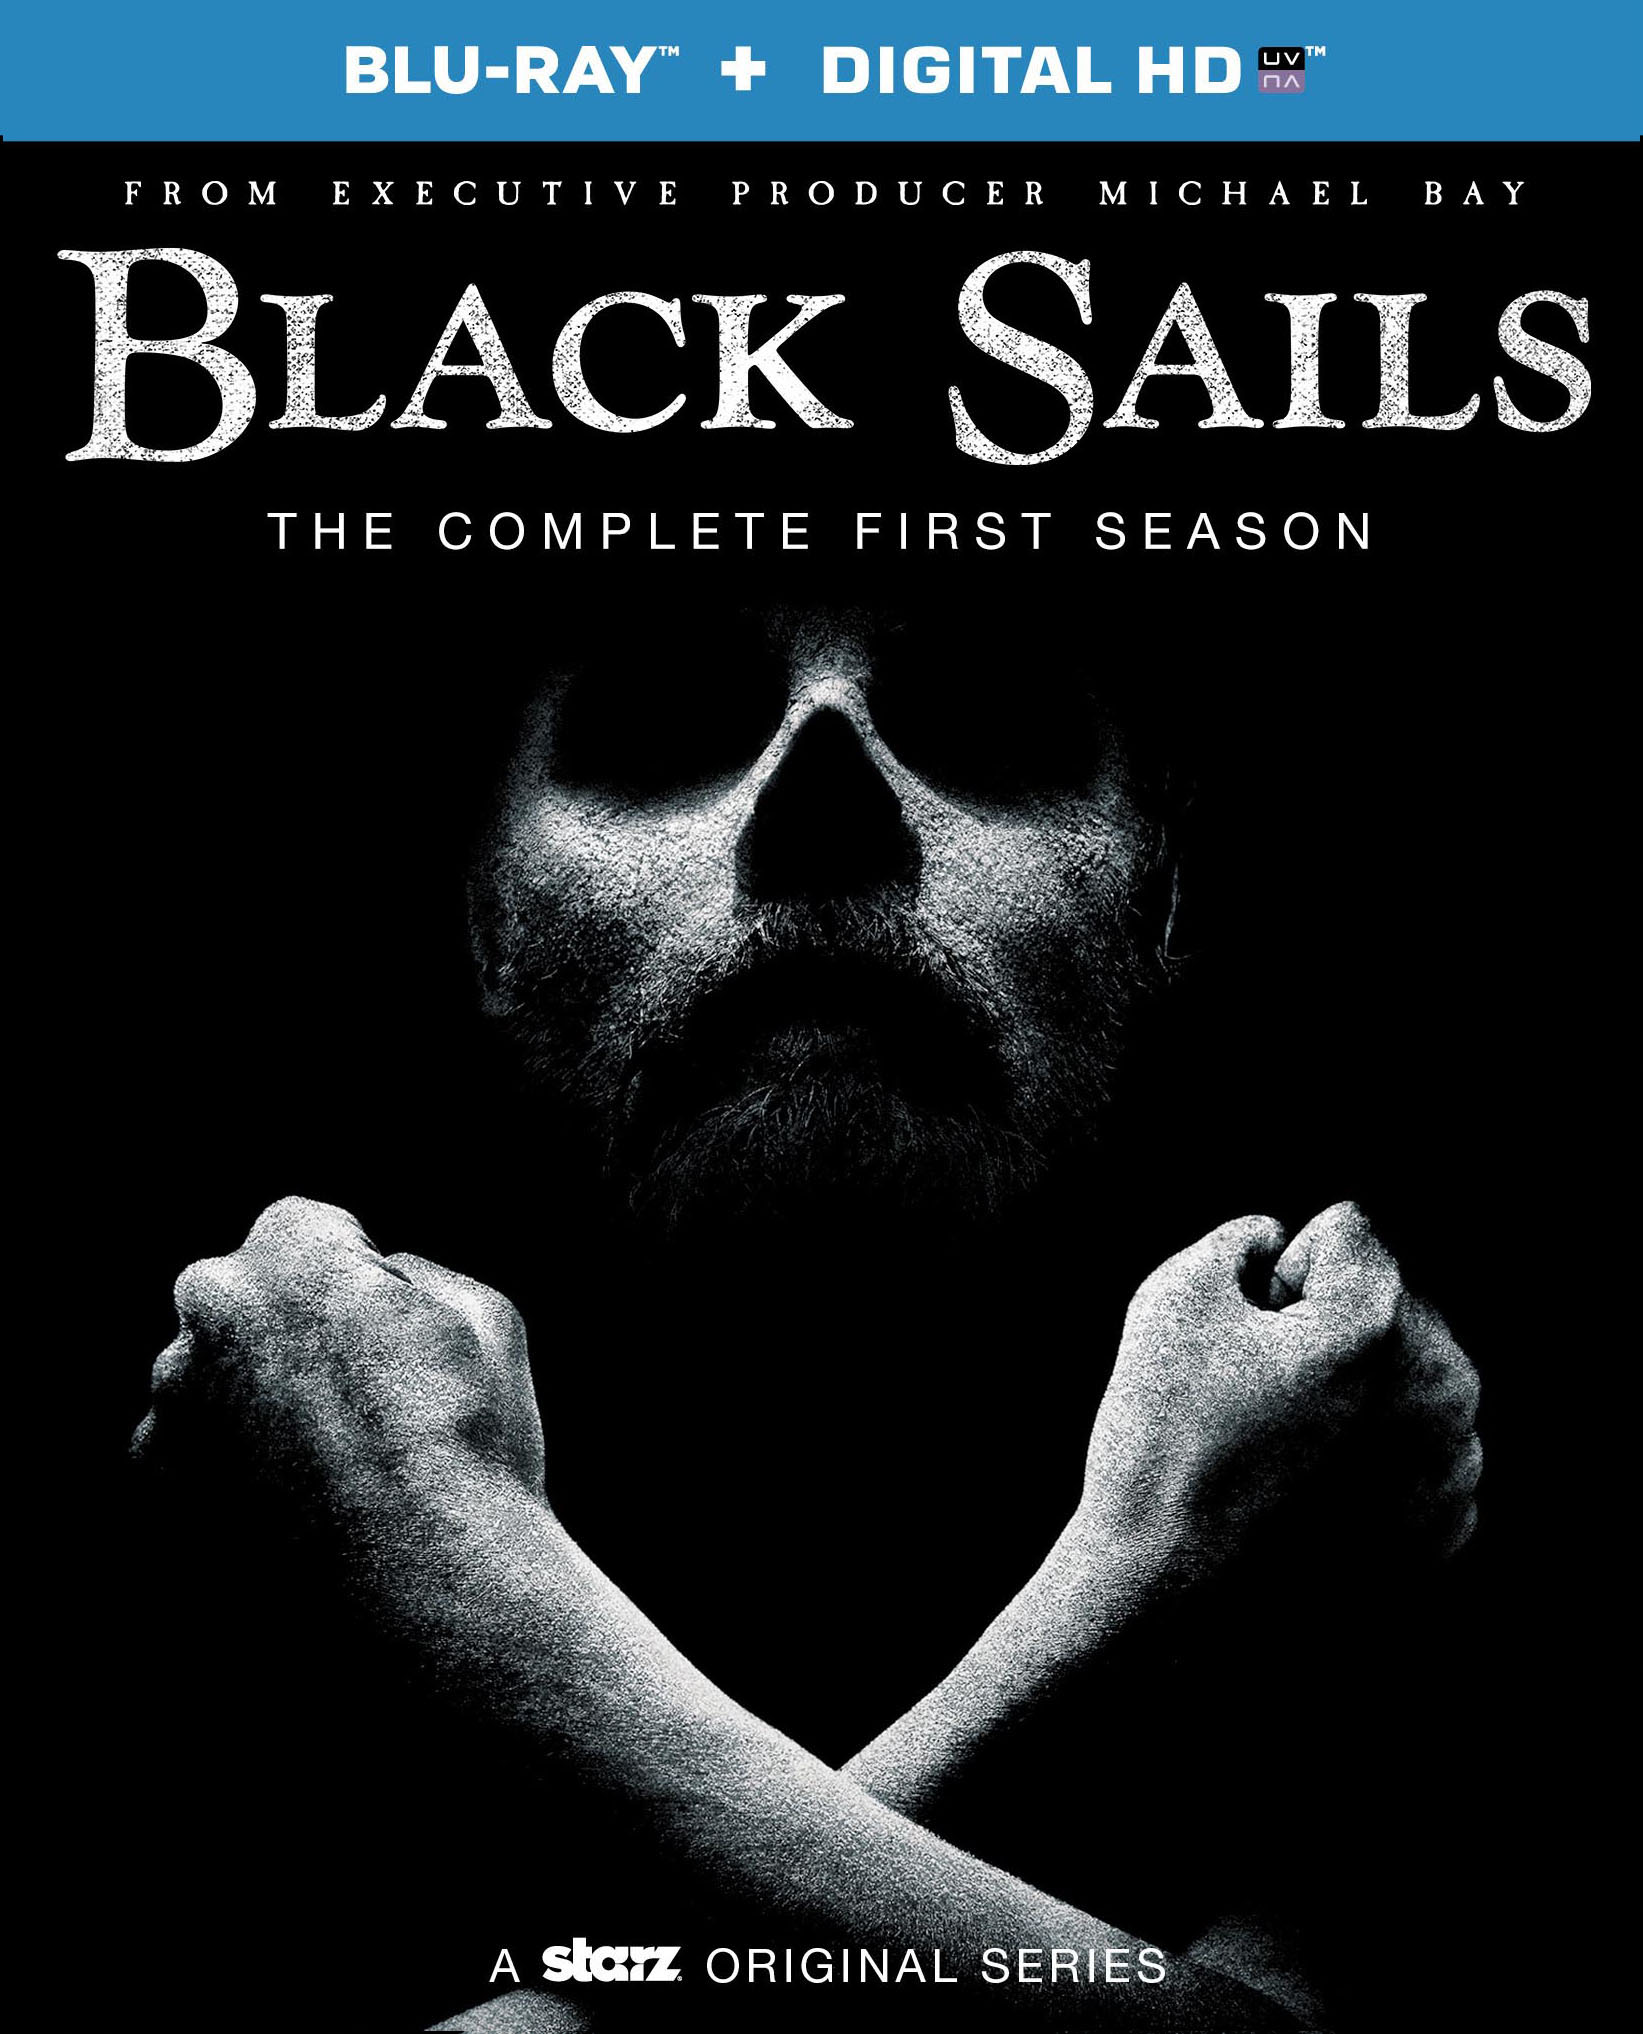 Black Sails The Complete First Season Includes Digital Copy Blu-ray